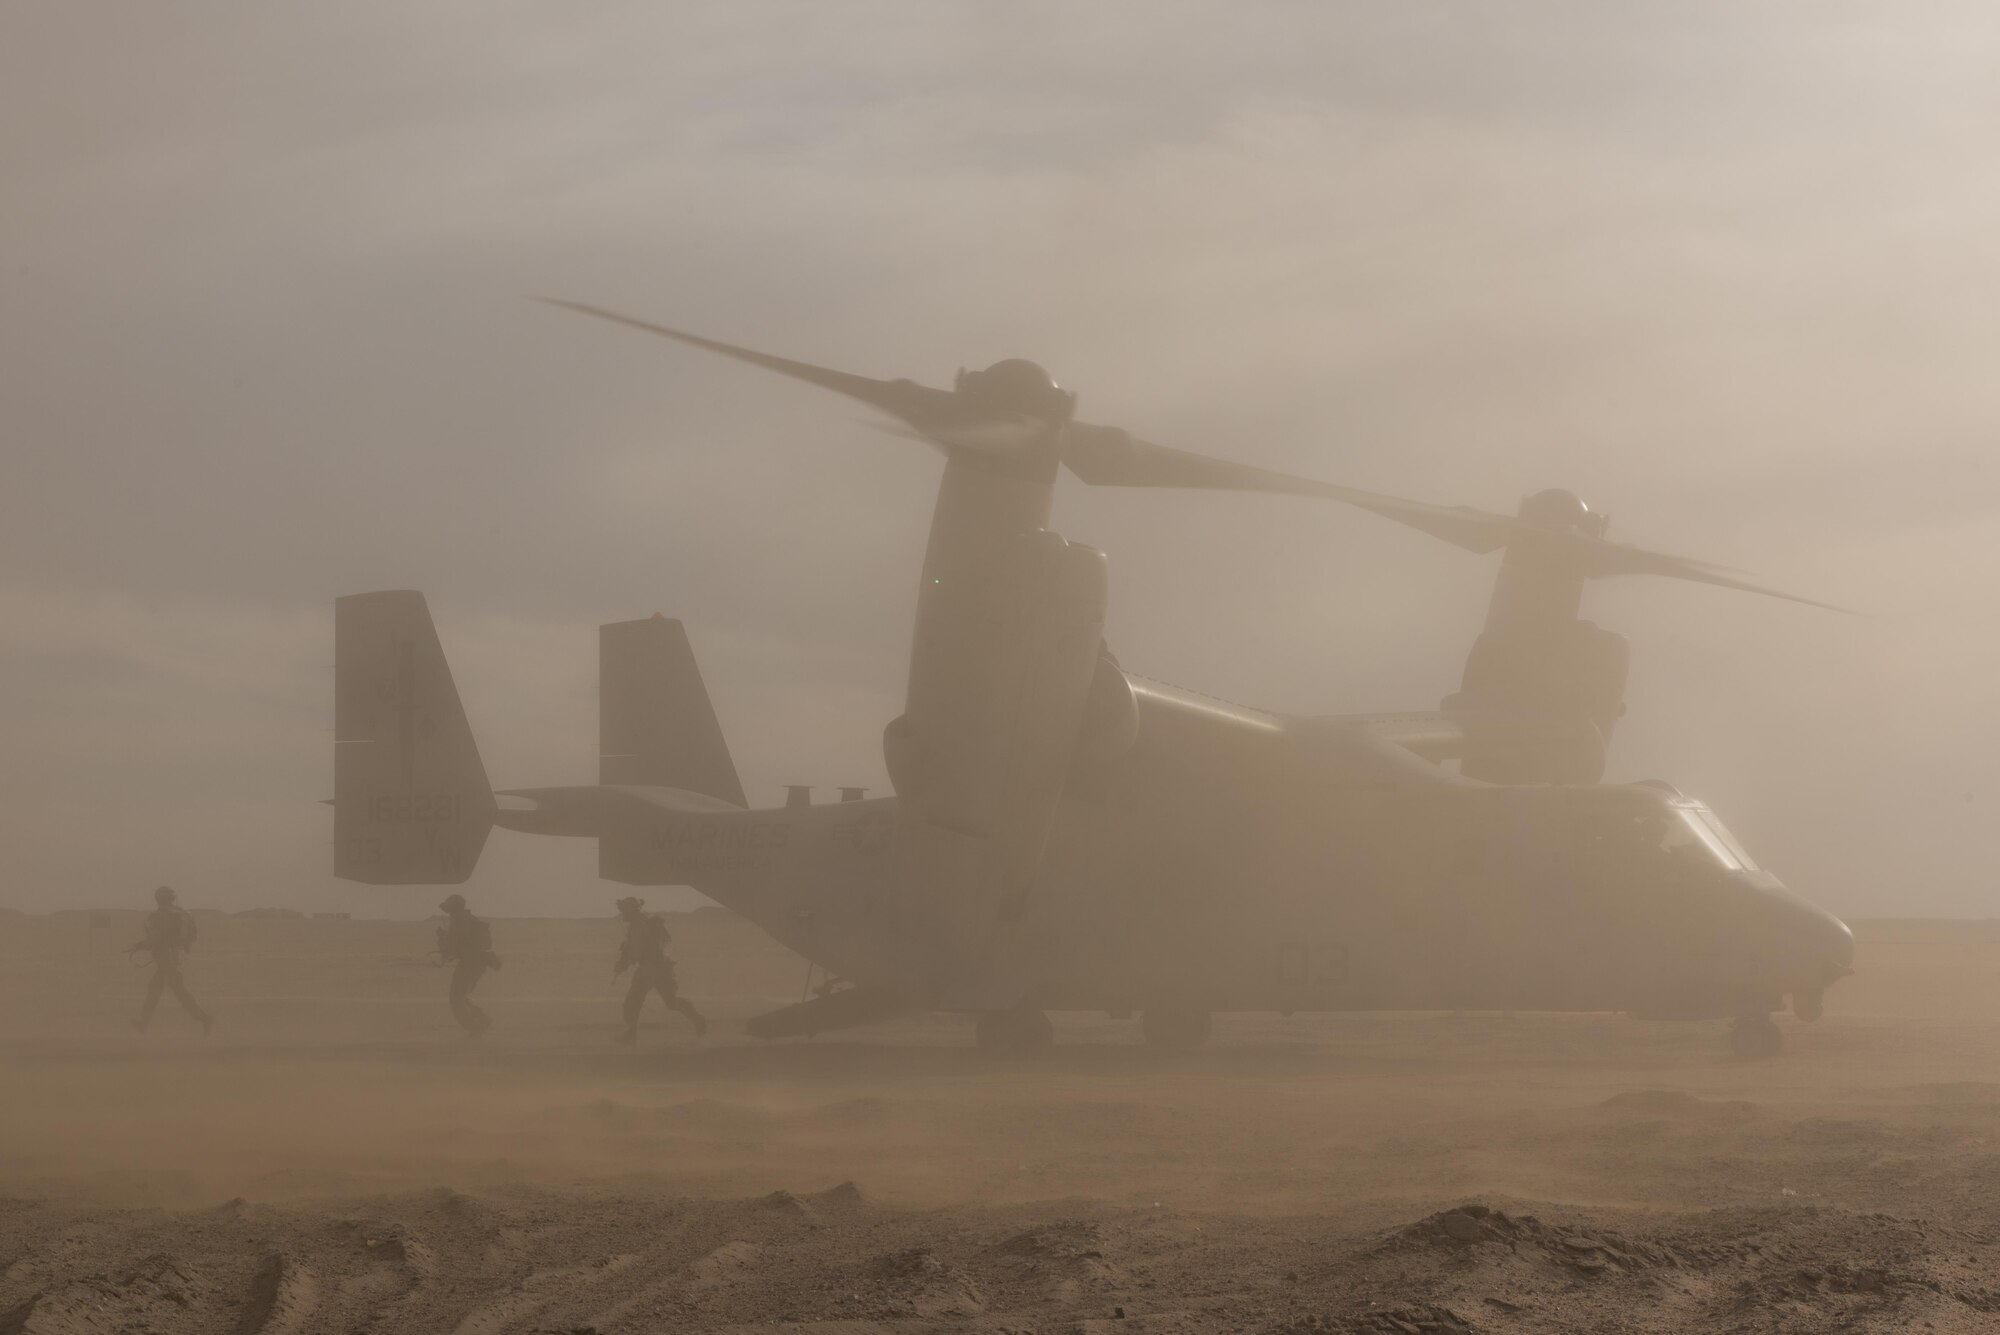 U.S. Marines assigned to 1st Battalion, 7th Marine regiment exit an MV-22 Osprey assigned to Marine Medium Tiltrotor Squadron 165 during a mission exercising the tactical recovery of aircraft and personnel at an undisclosed location in Southwest Asia, April 5, 2017. The TRAP capability provided by the Marines enables pilots supporting Operation Inherent Resolve to fly with the confidence of knowing rescue personnel are on standby. (U.S. Air Force photo/Master Sgt. Benjamin Wilson)(Released)